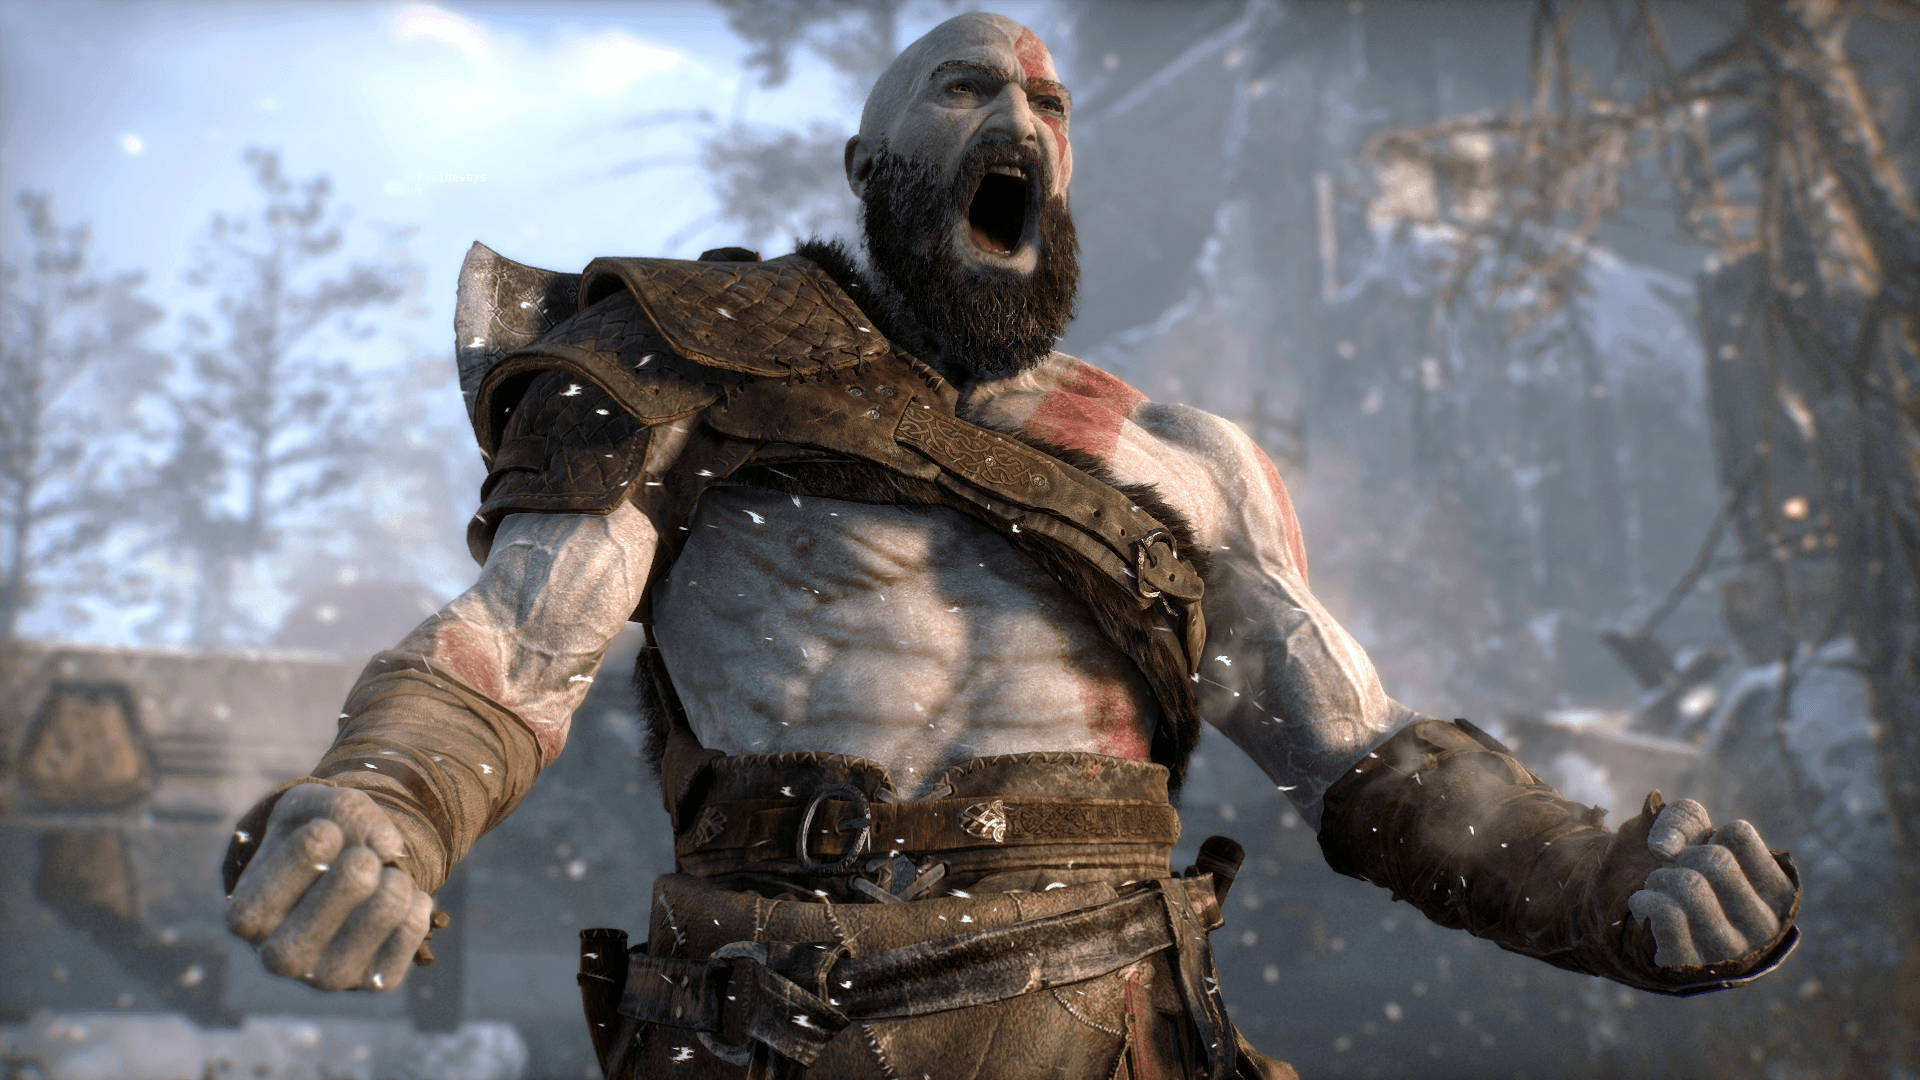 God of War's Kratos in an Uncontrollable Rage Wallpaper